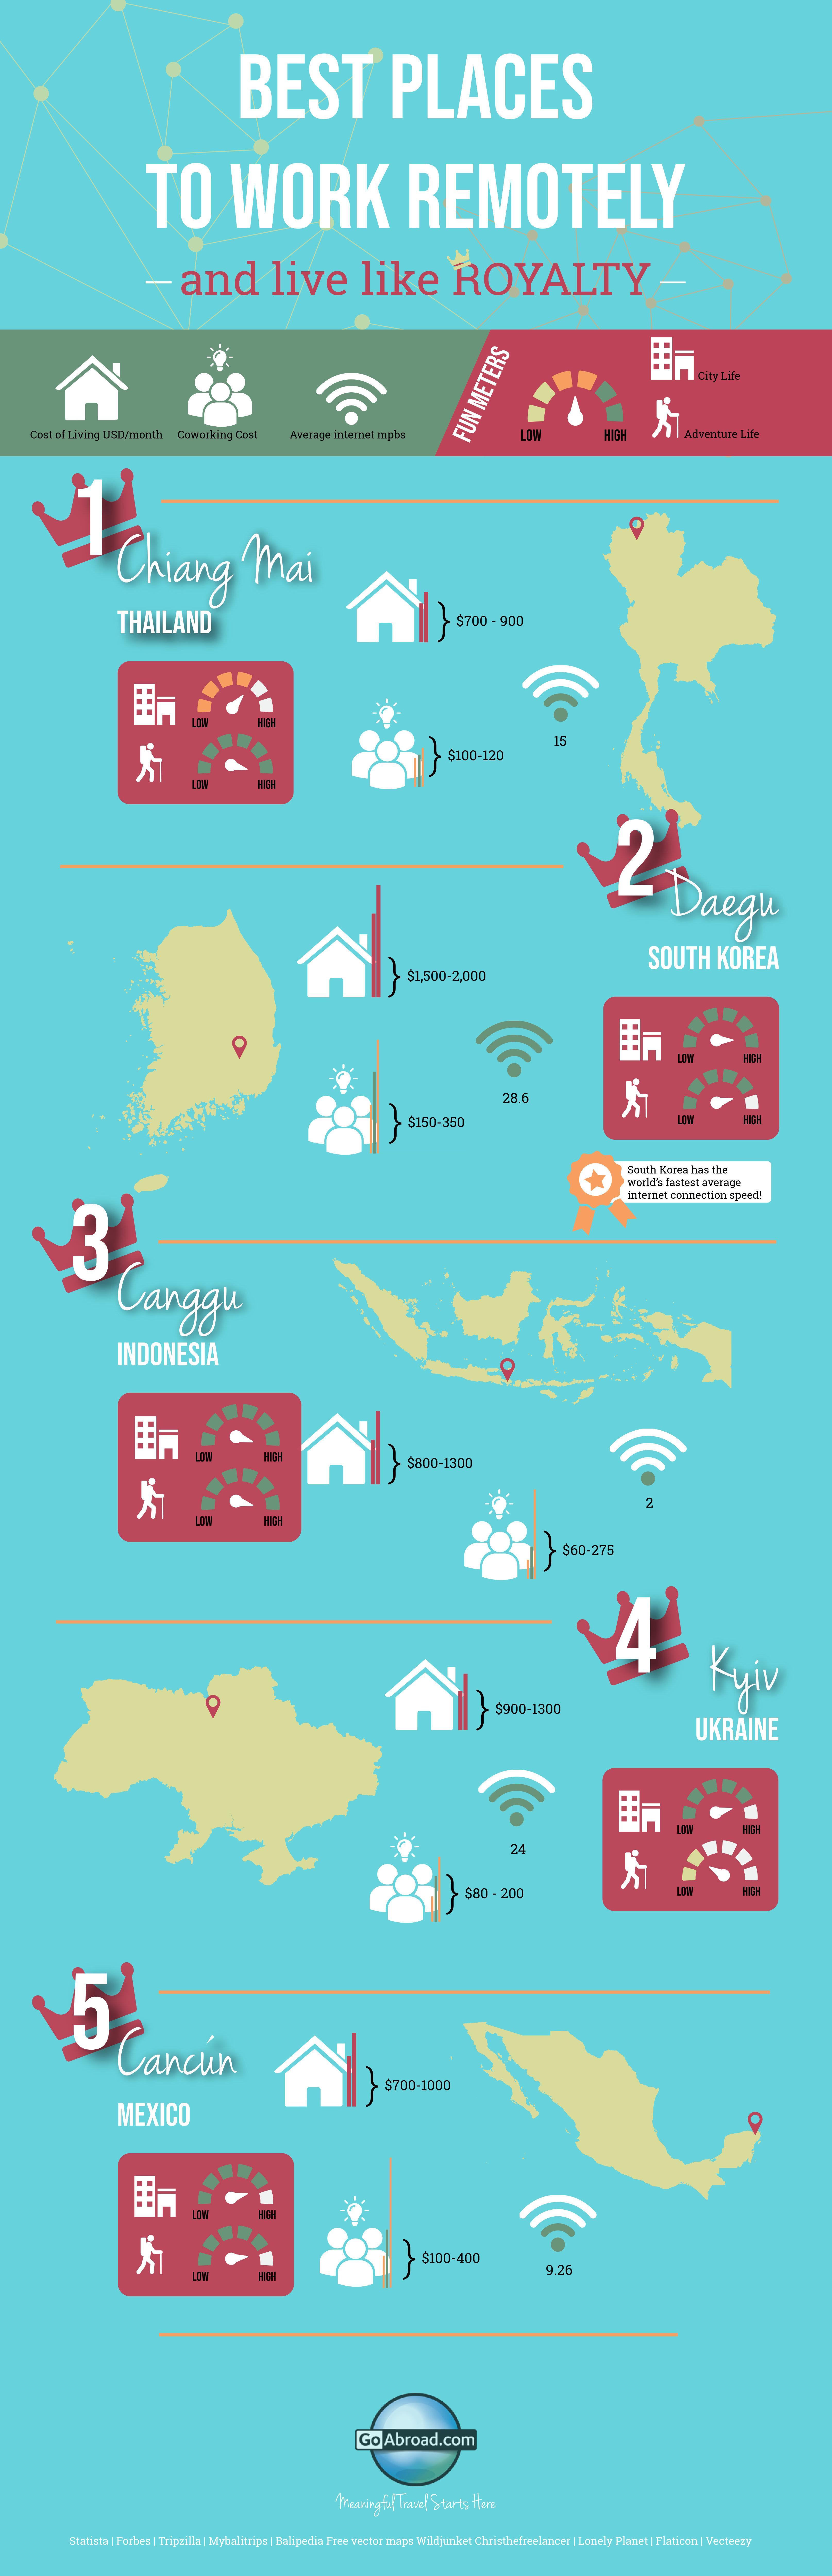 5 Best Places to Work Remotely & Live Like Royalty [Infog...